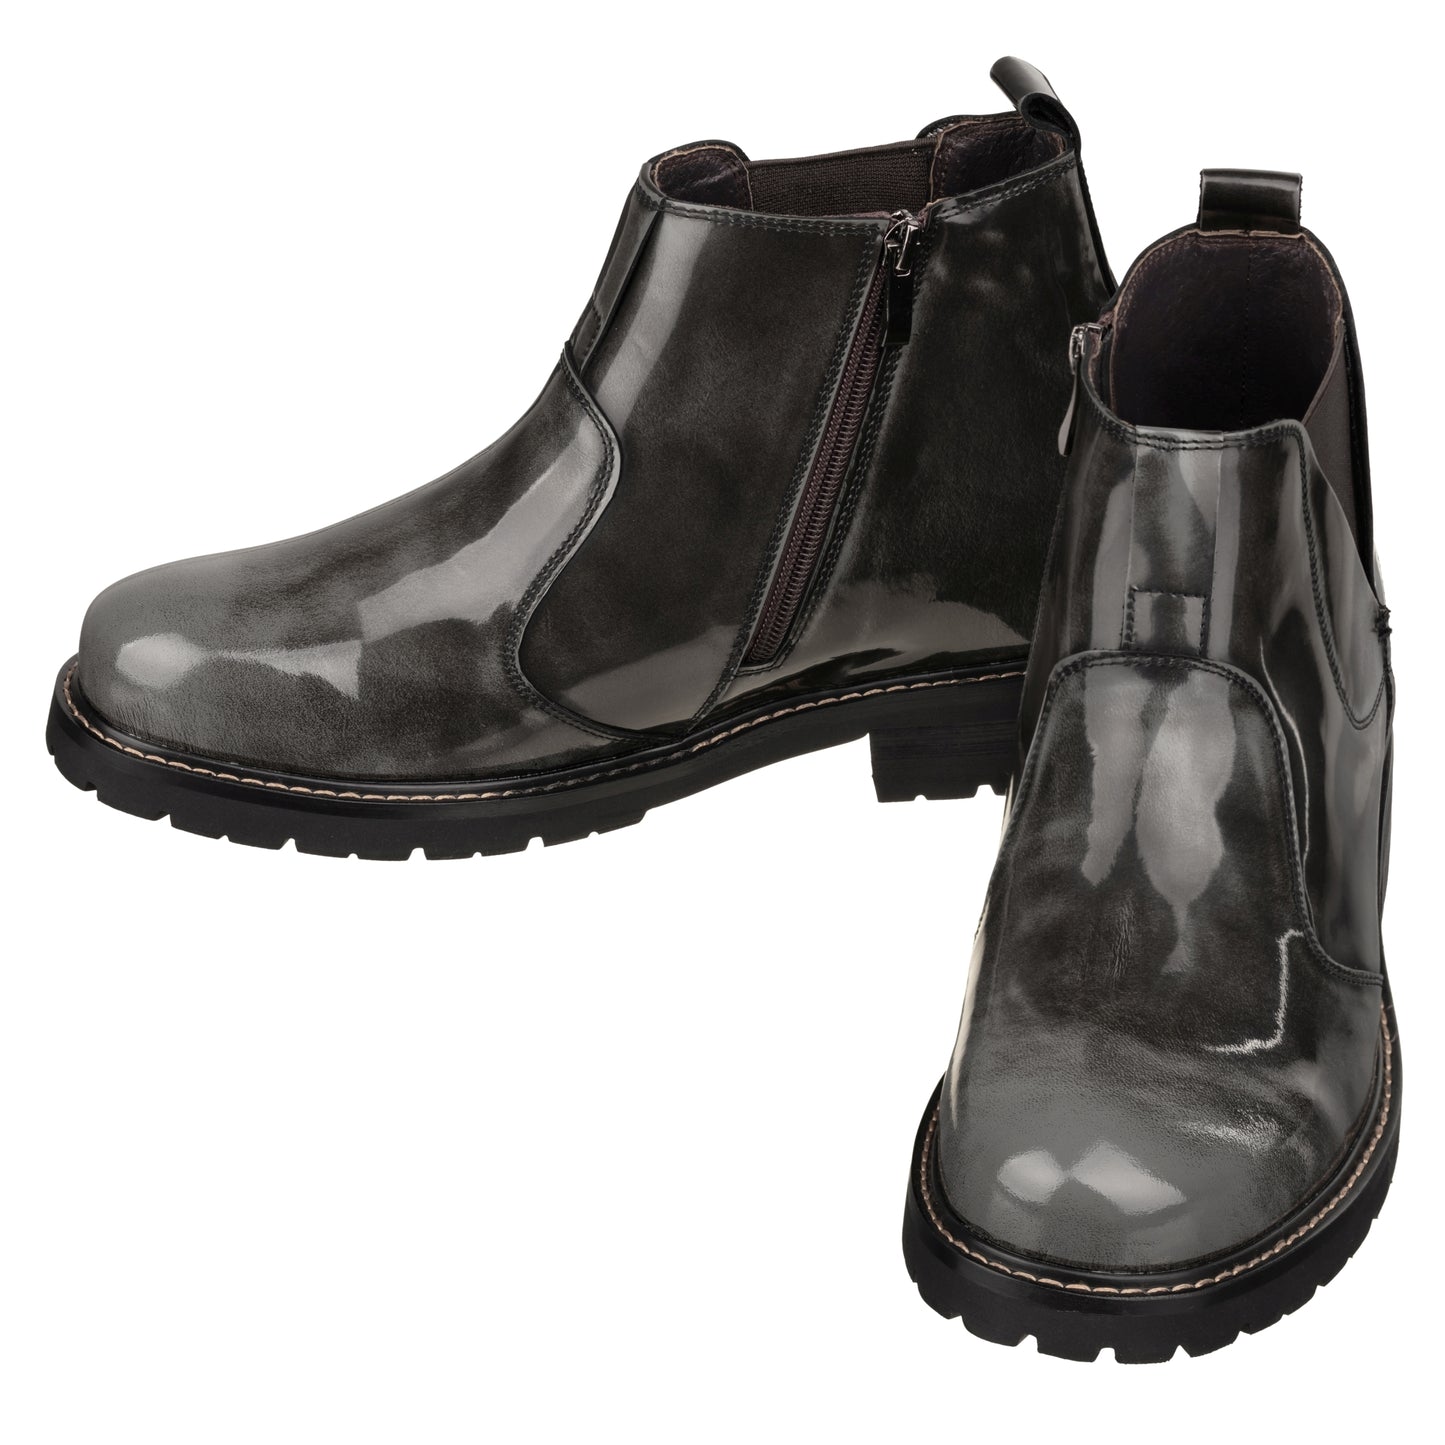 Elevator shoes height increase CALTO - K8991 - 3.6 Inches Taller (Grey) - Patent Leather Boot